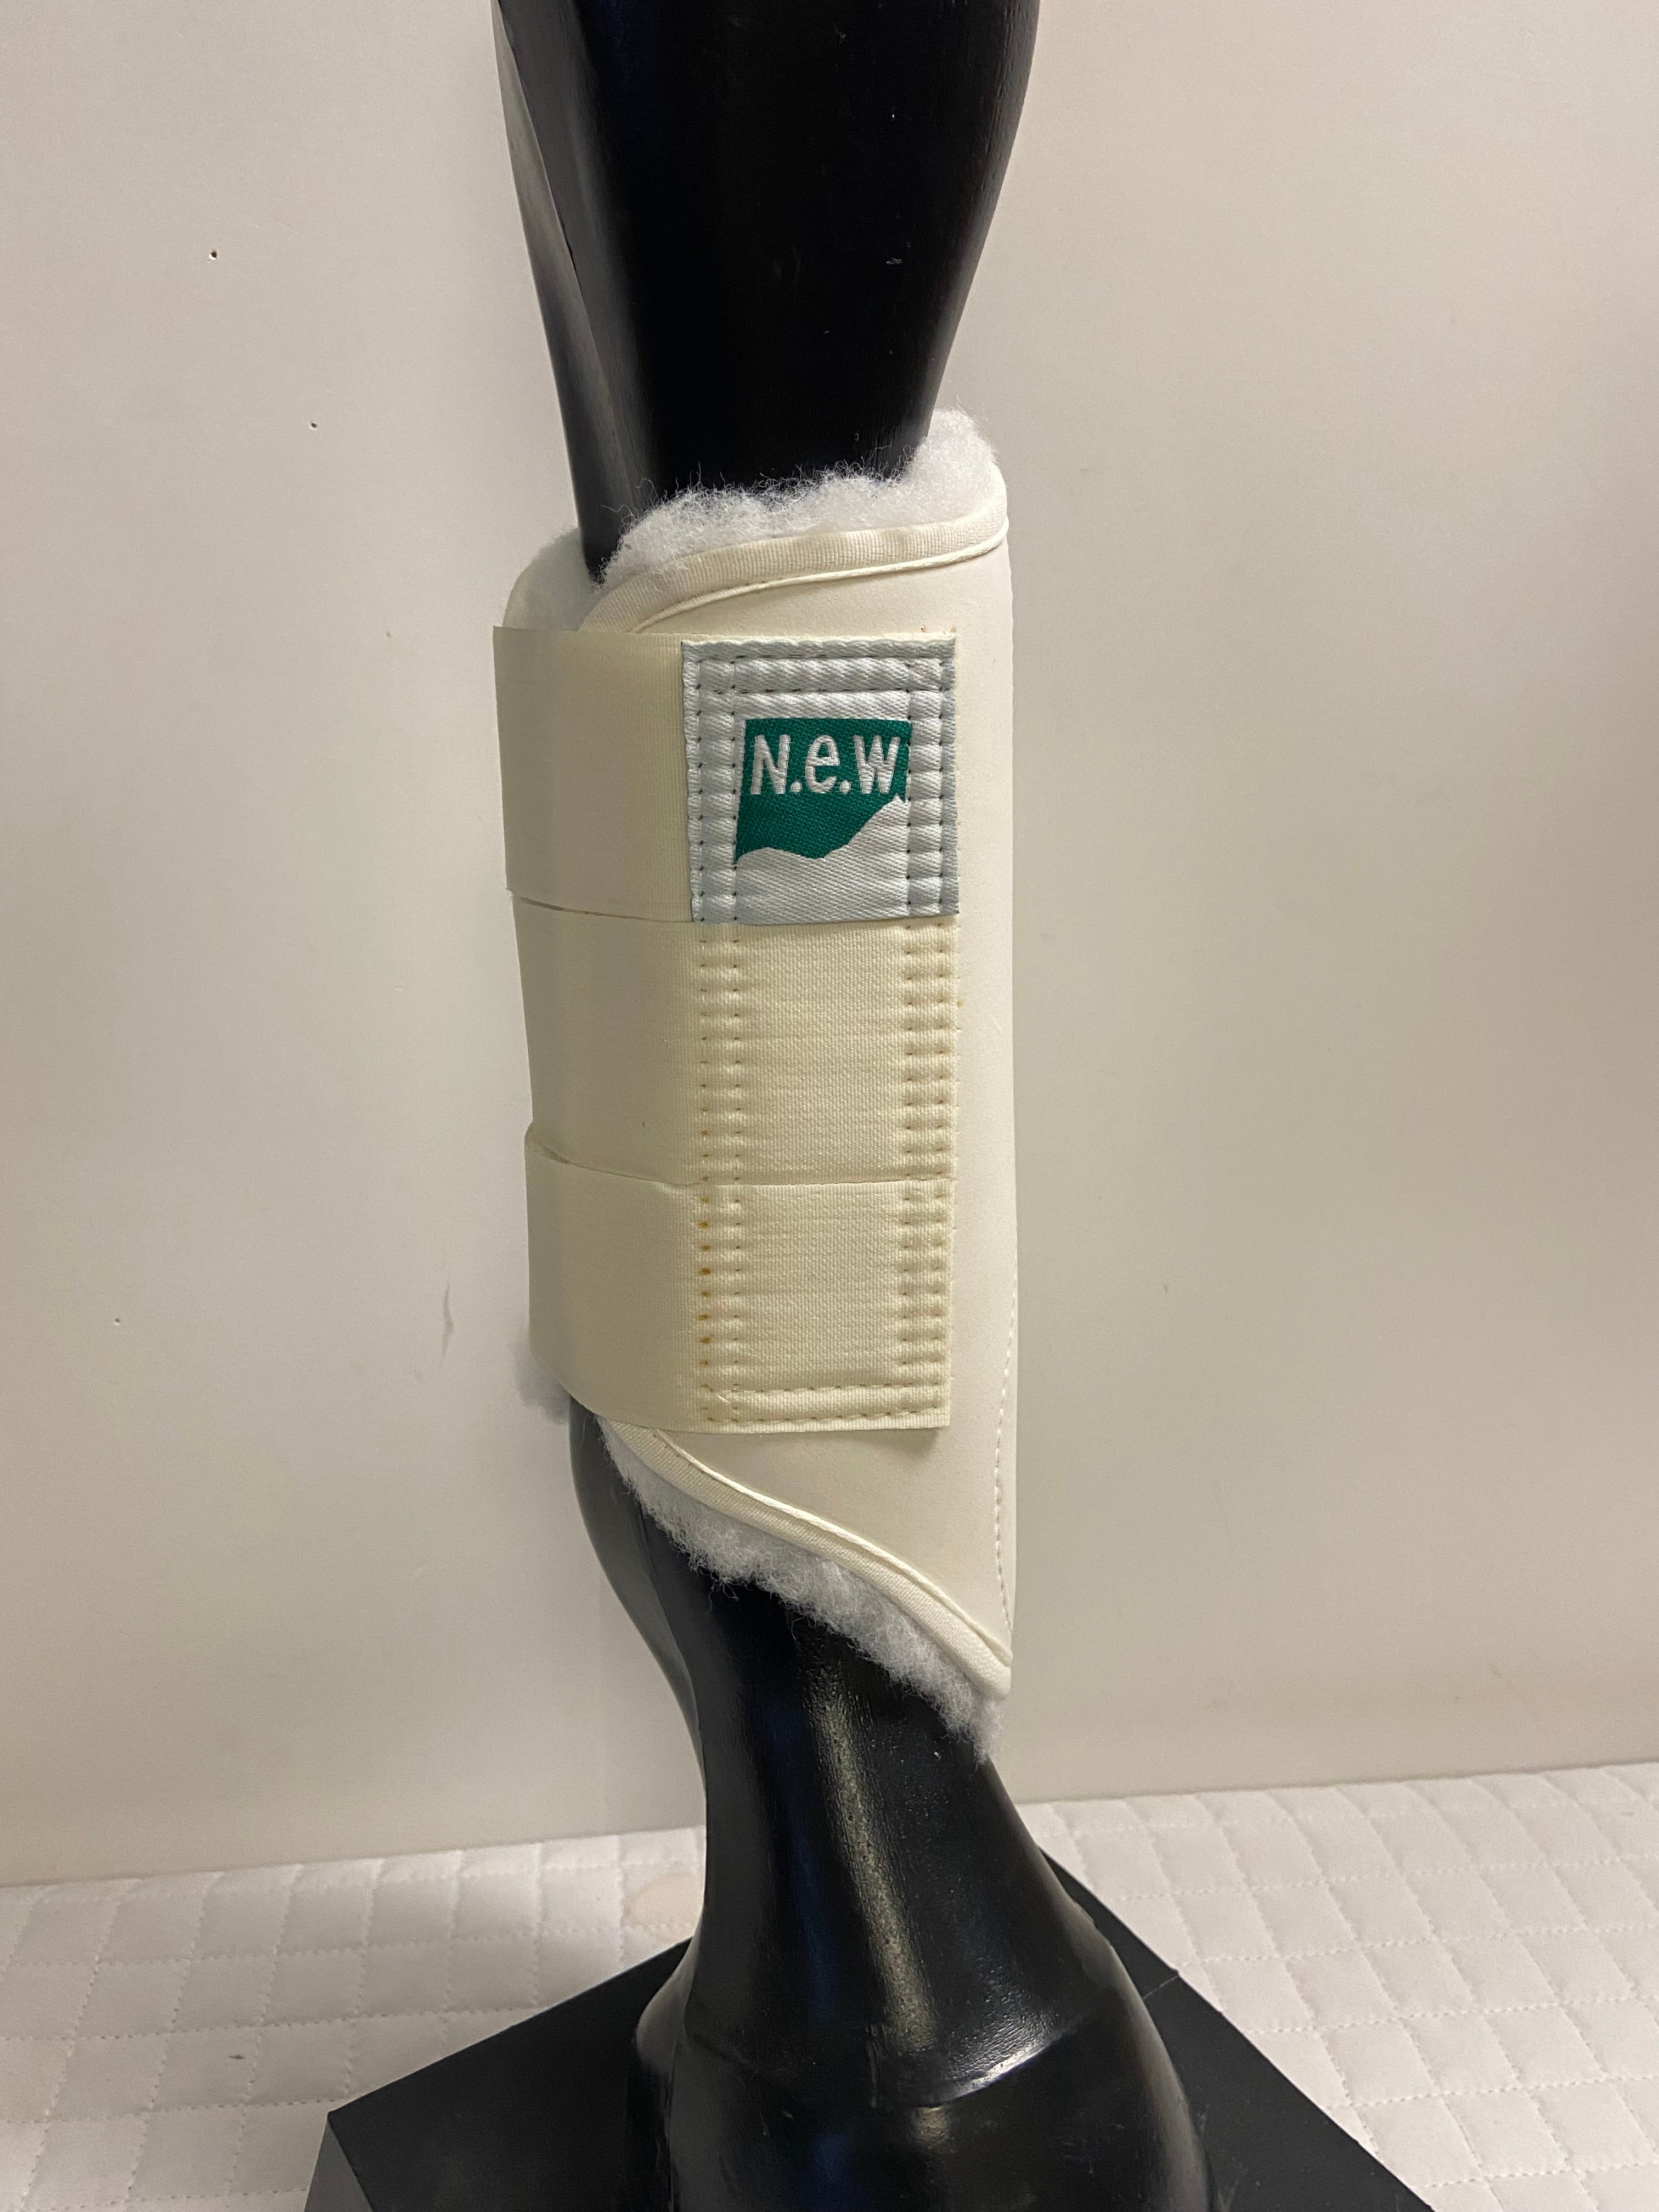 N.E.W. Dressage Exercise Boots